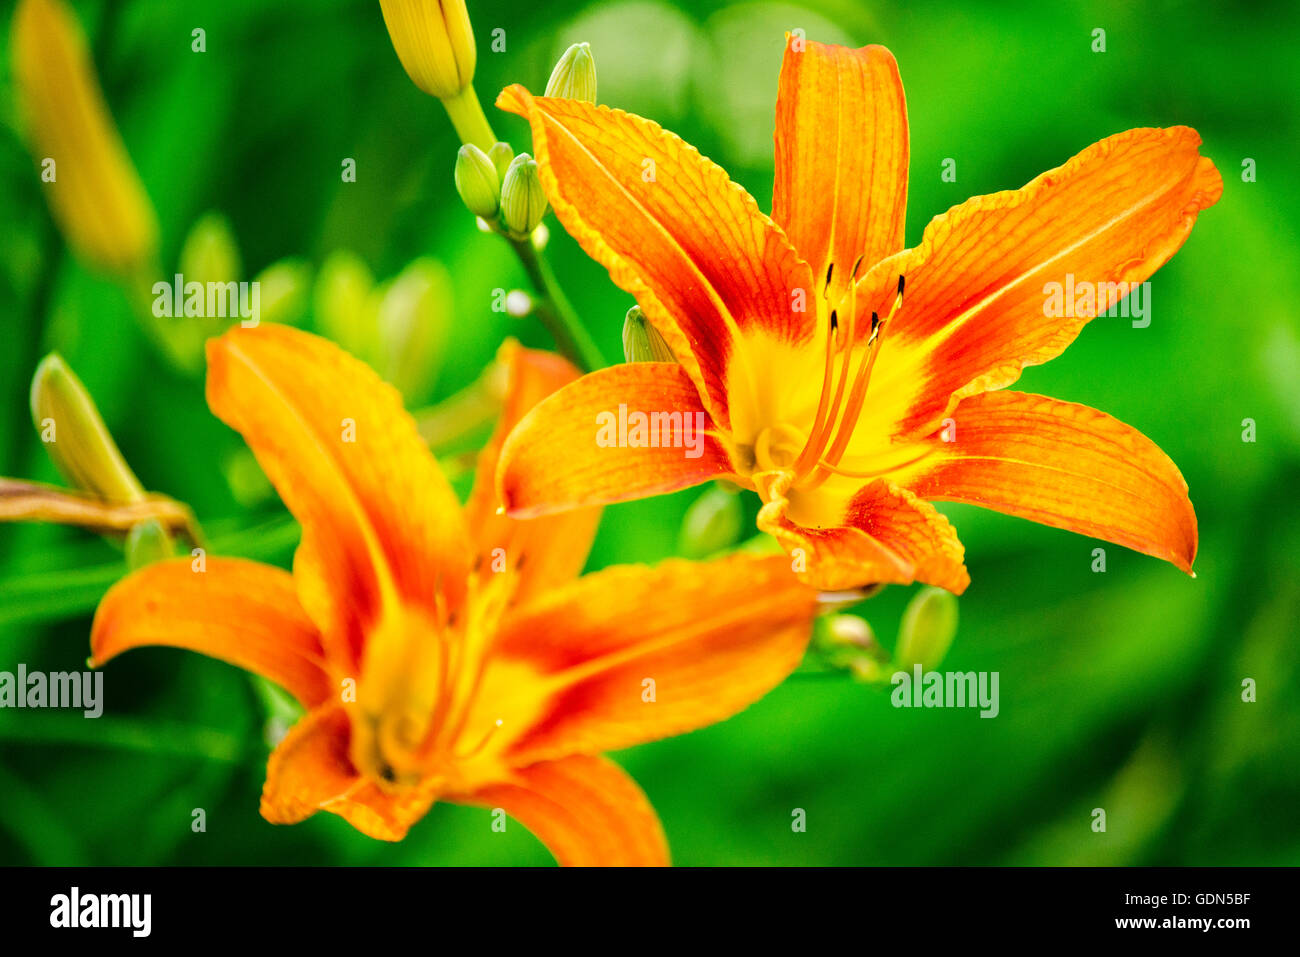 Orange lilies with green foliage close up Stock Photo